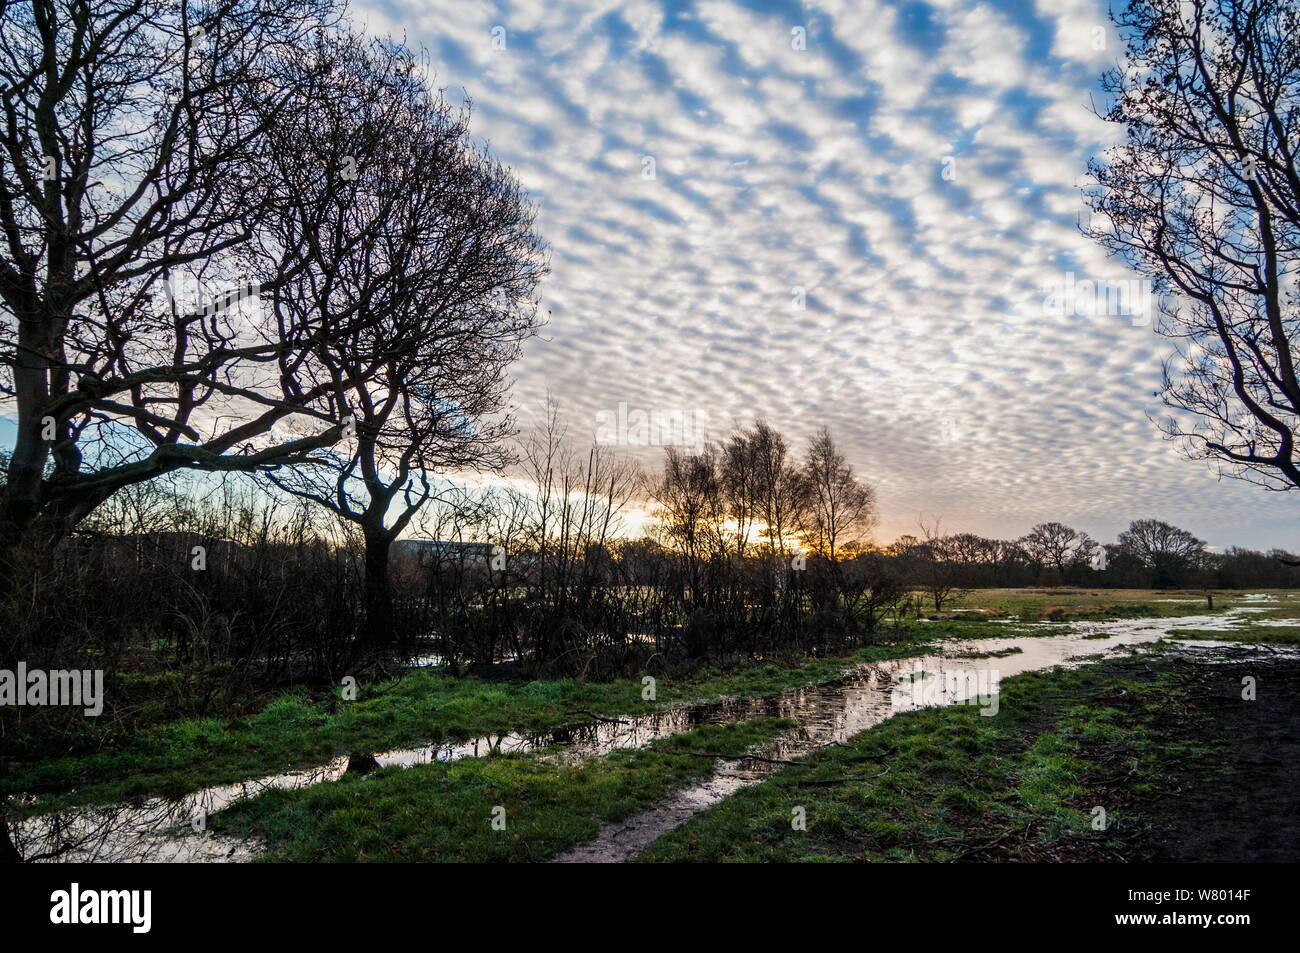 Altocumulus undulatus cloud formations and Oak (Quercus) trees at dawn.  Epping Forest, London, UK, January. Stock Photo